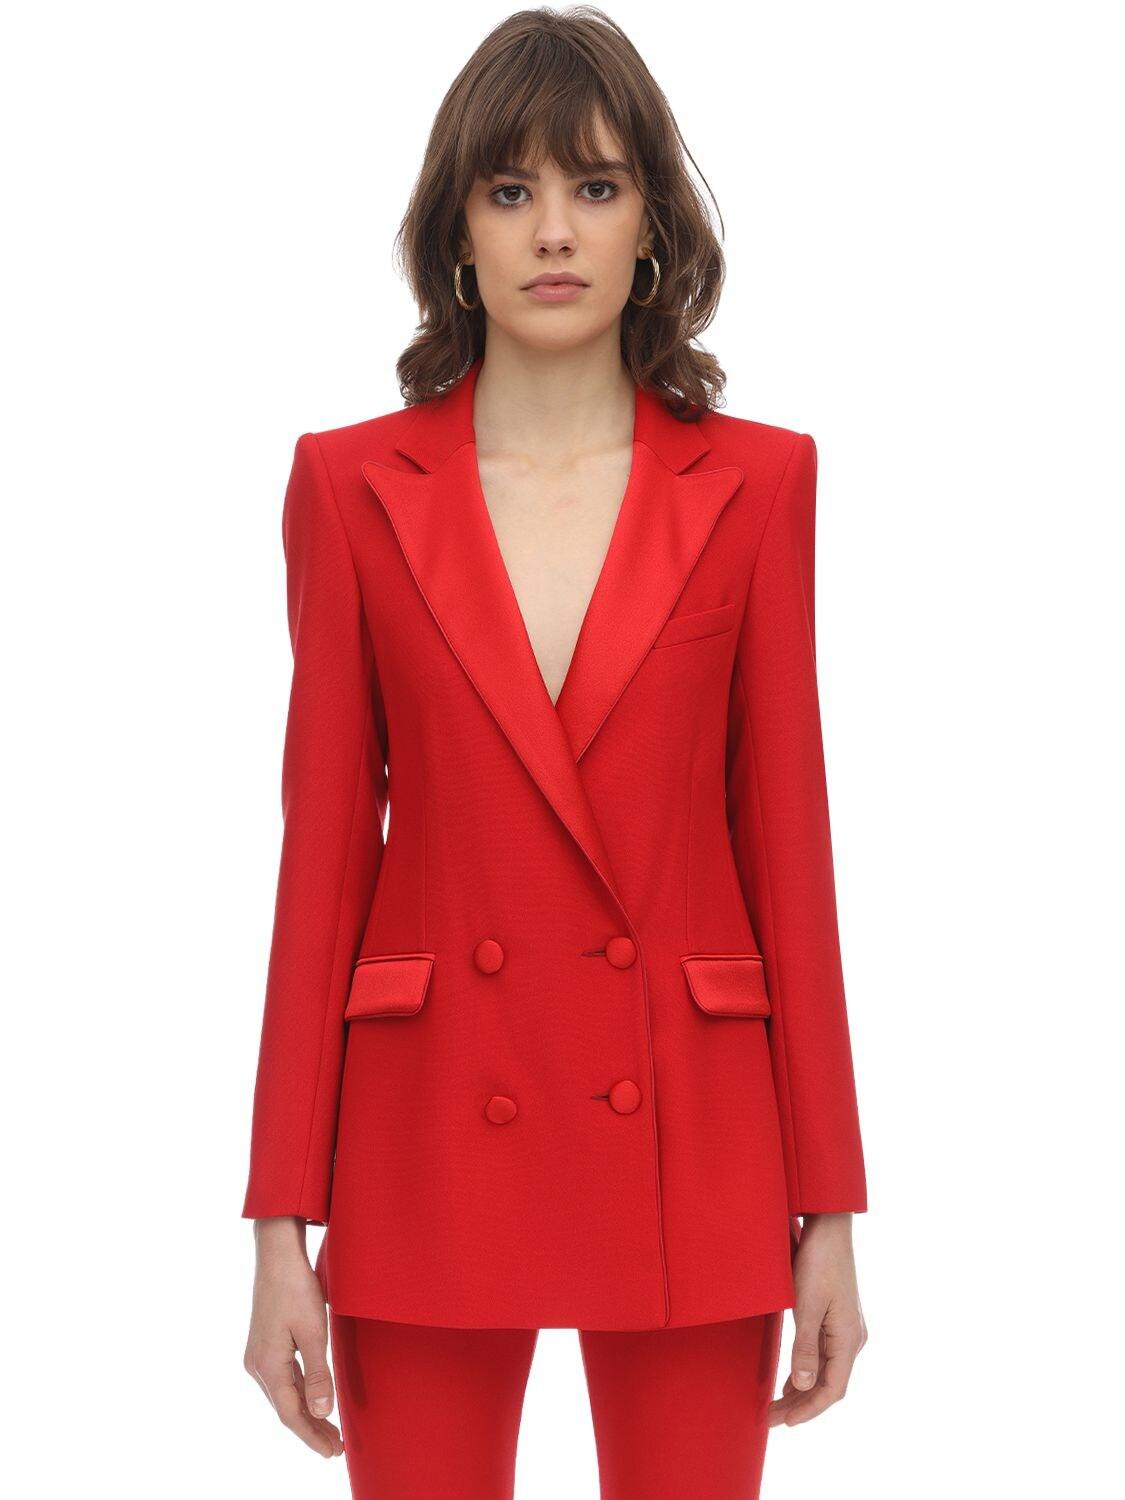 Hebe Studio Synthetic Bianca Viscose Blend Cady & Satin Blazer in Red ...